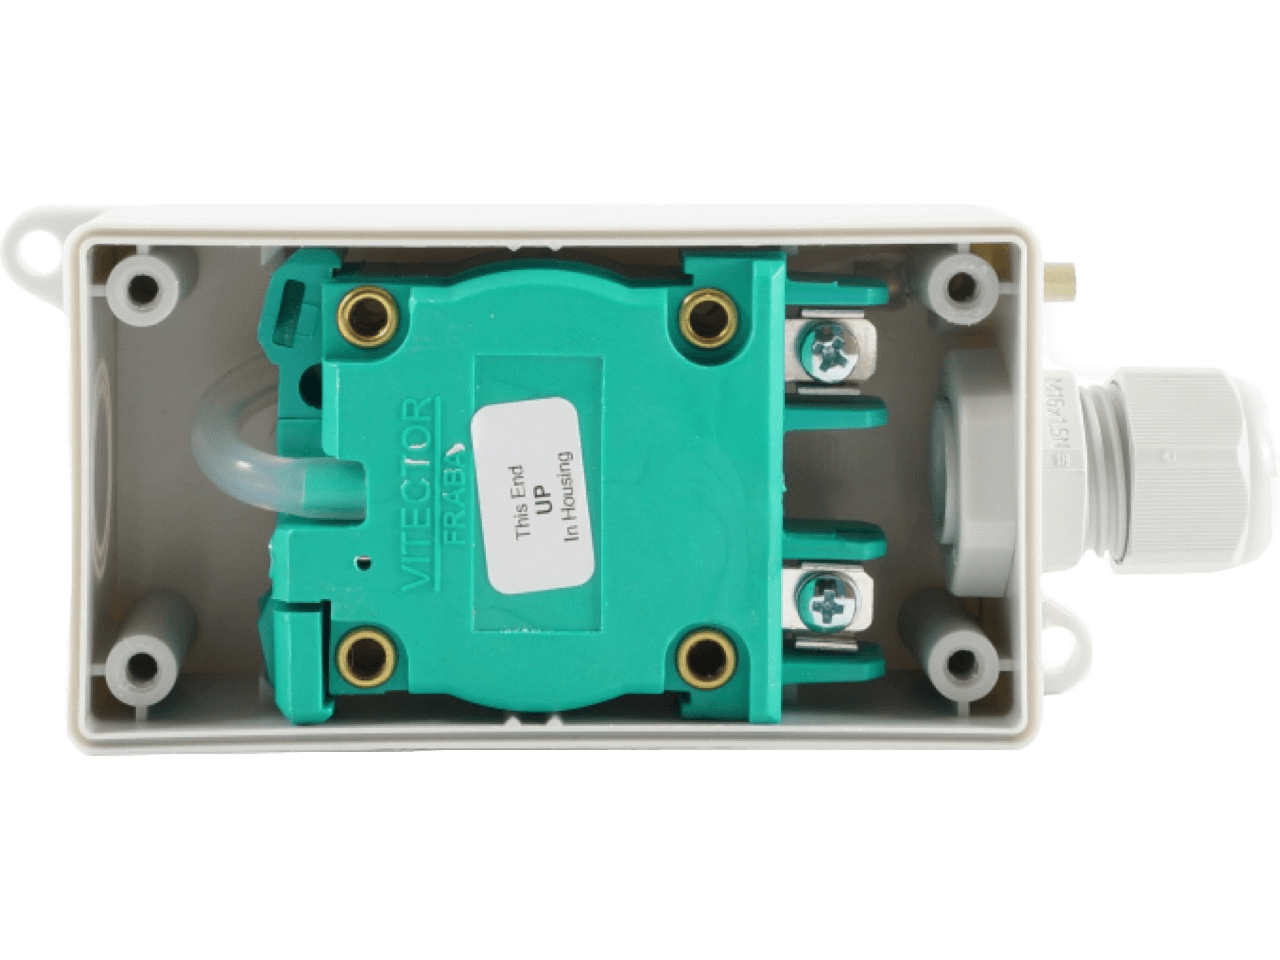 FRABA VITECTOR DW 3O-200 Airwave Switch Normally Closed IP65 Enclosure